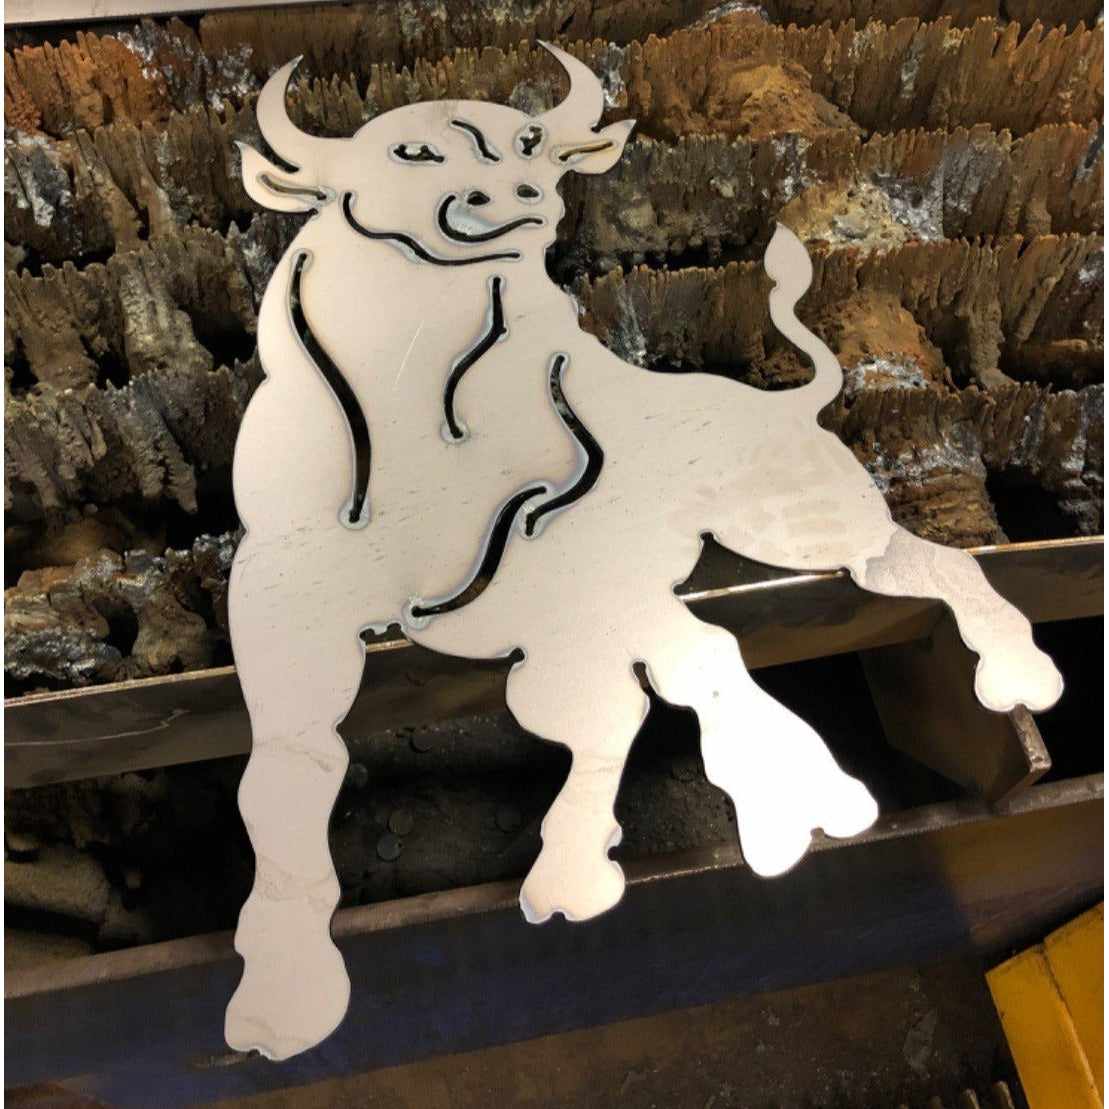 Free Funny Crazy Cow-DXF files Cut Ready for CNC-DXFforCNC.com